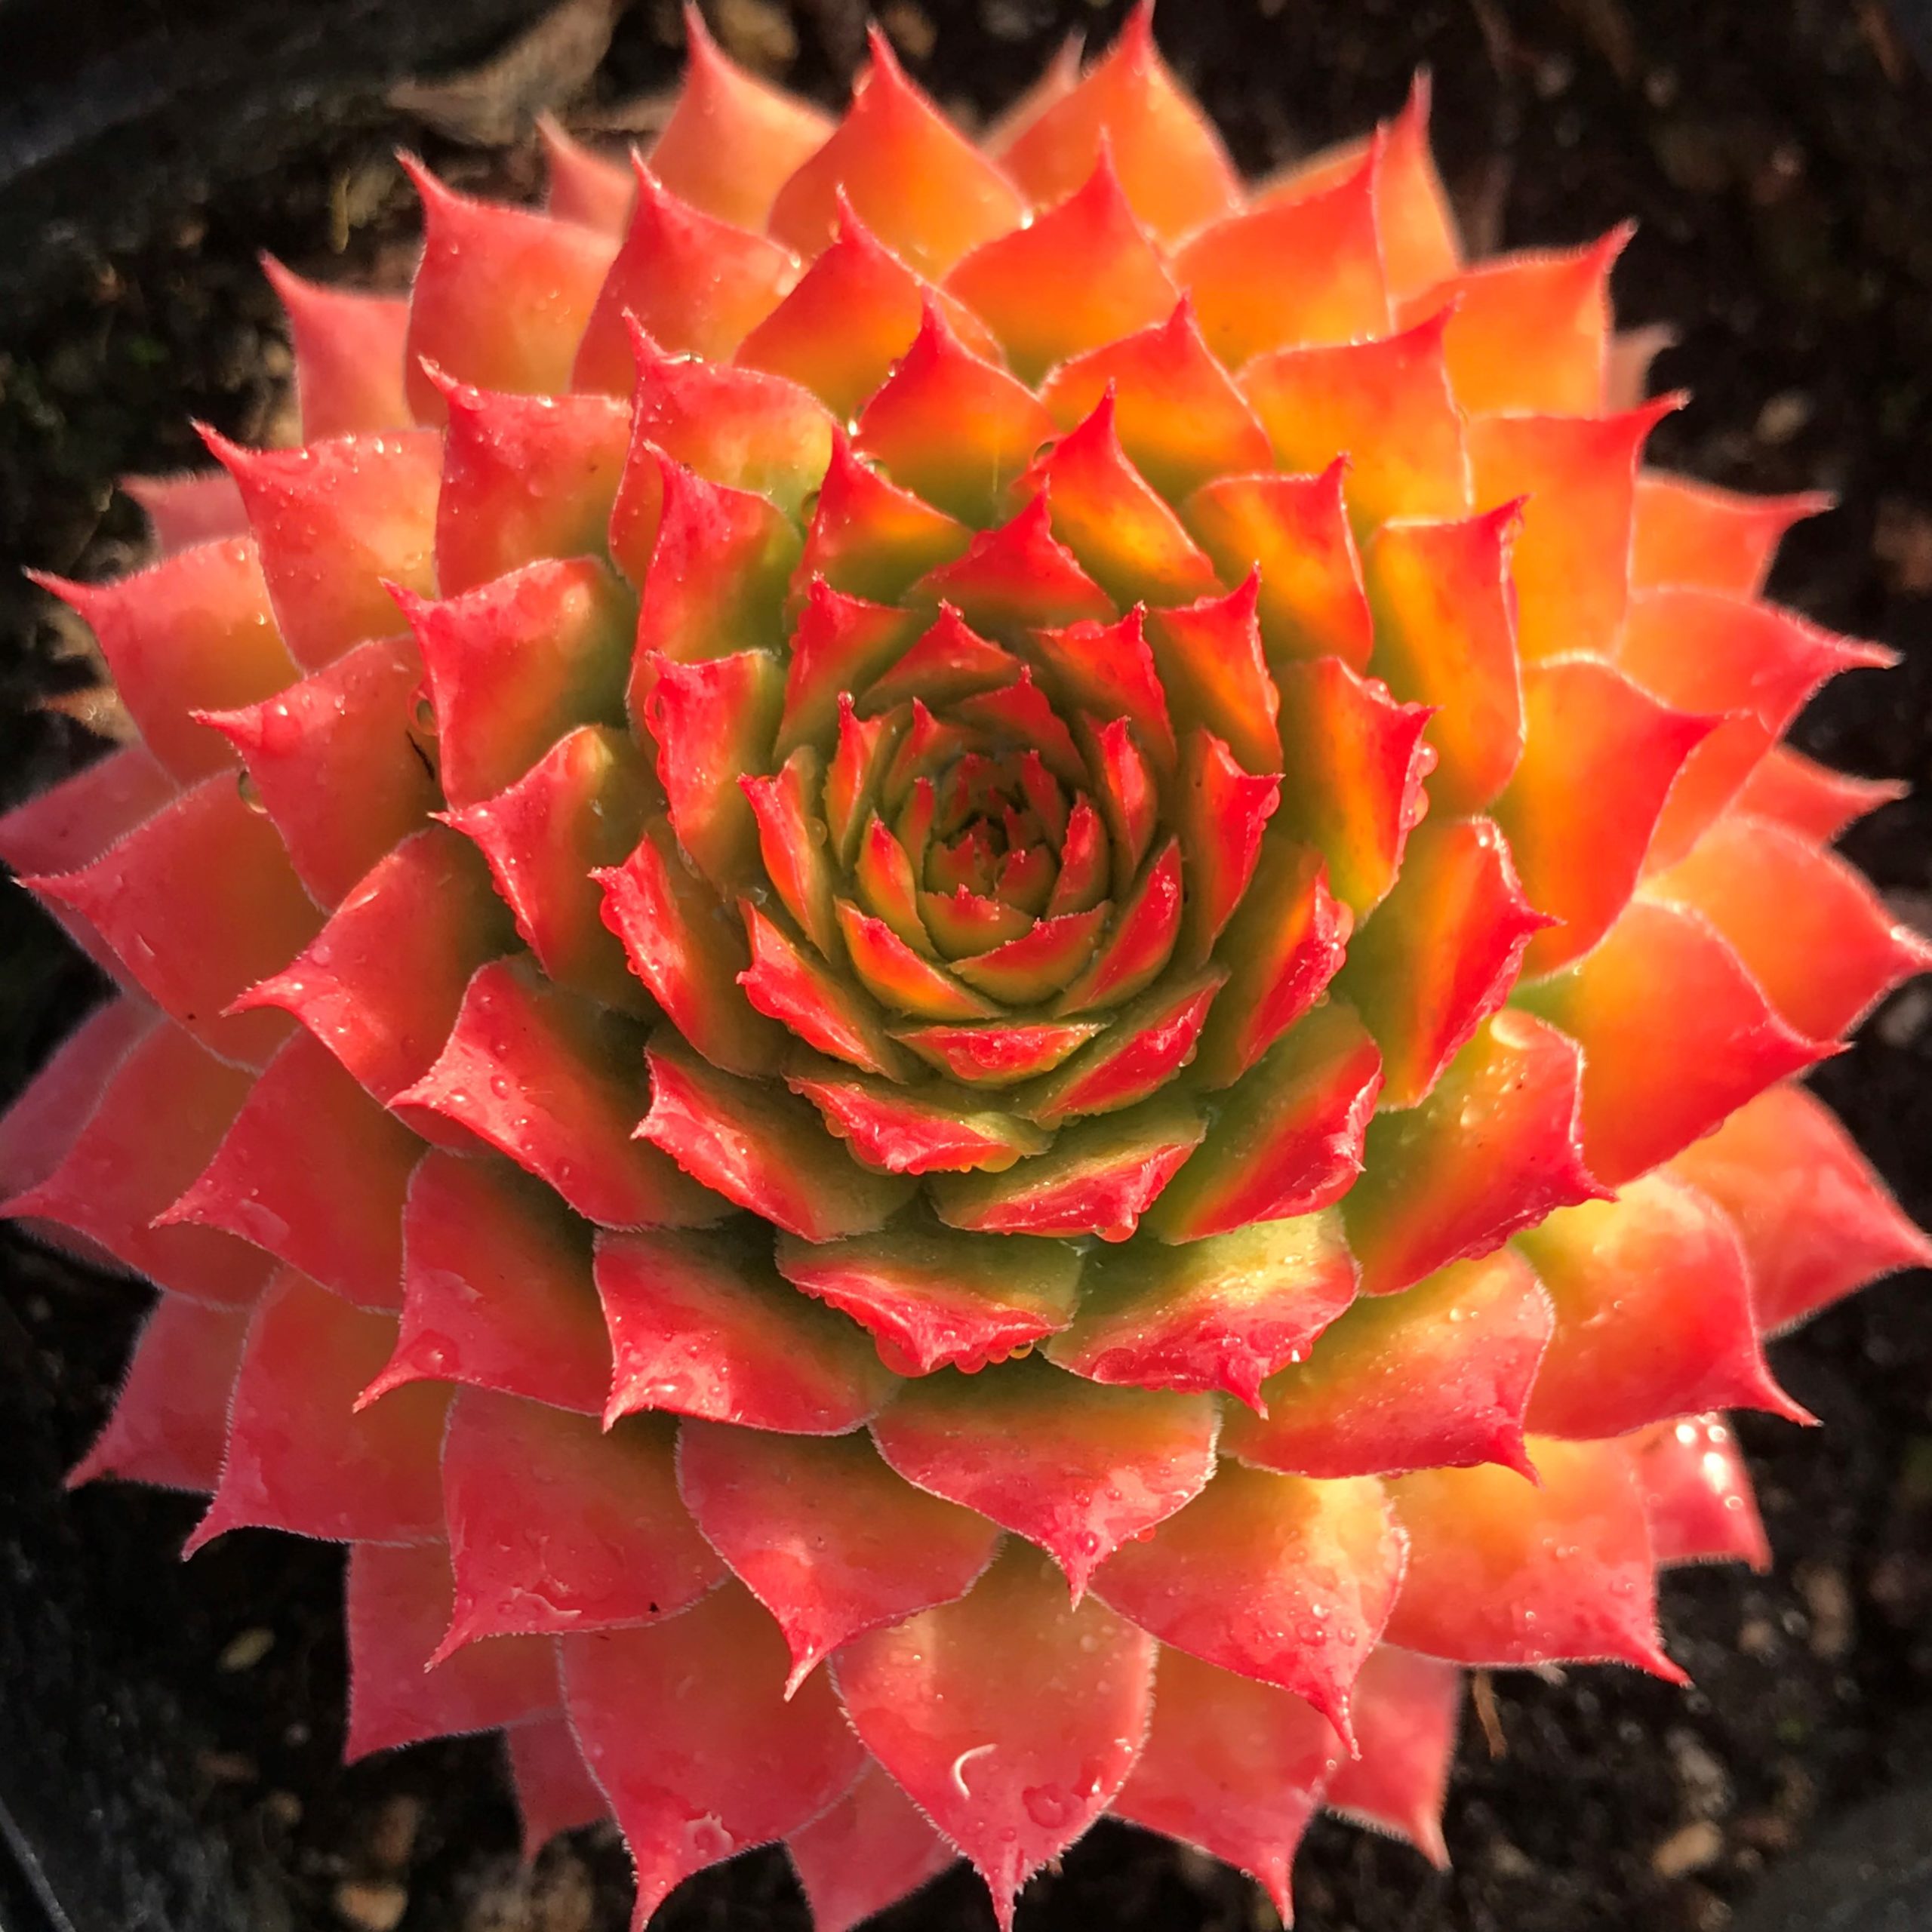 Sempervivum Chick Charms 'Gold Nugget' (Hens and Chicks) - 1 Gallon Potted Perennial